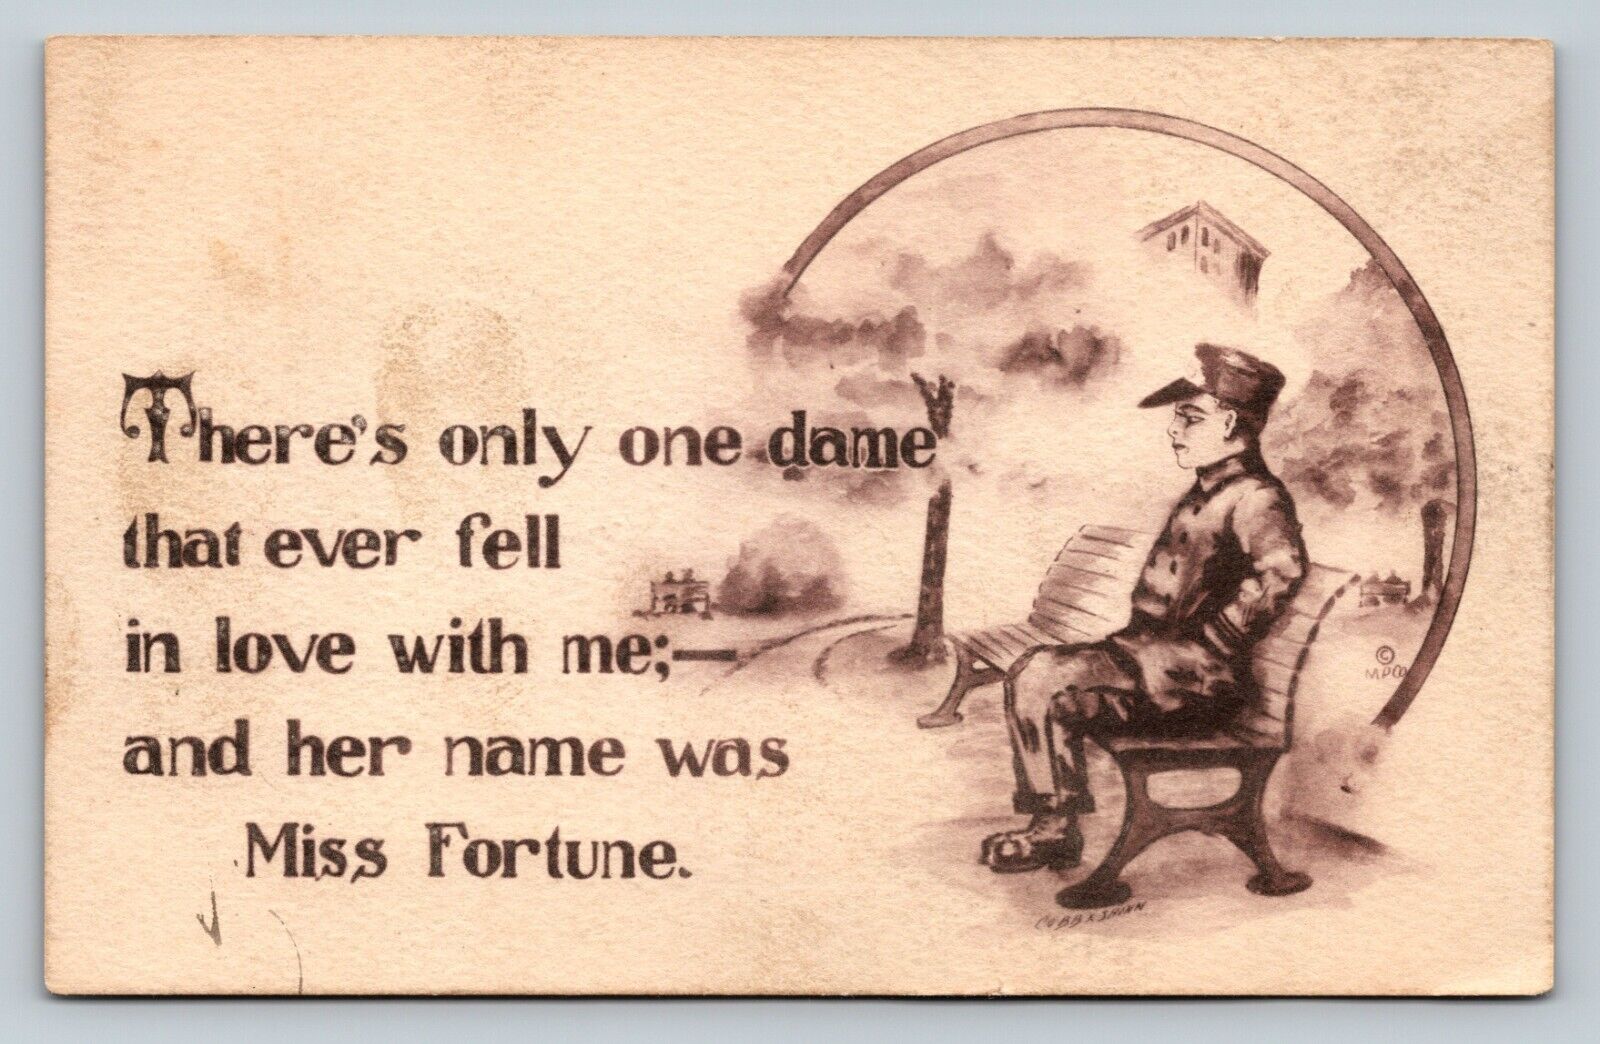 1912 Only One Dame Fell In Love w/ Me, Her Name Was Misfortune ANTIQUE Postcard